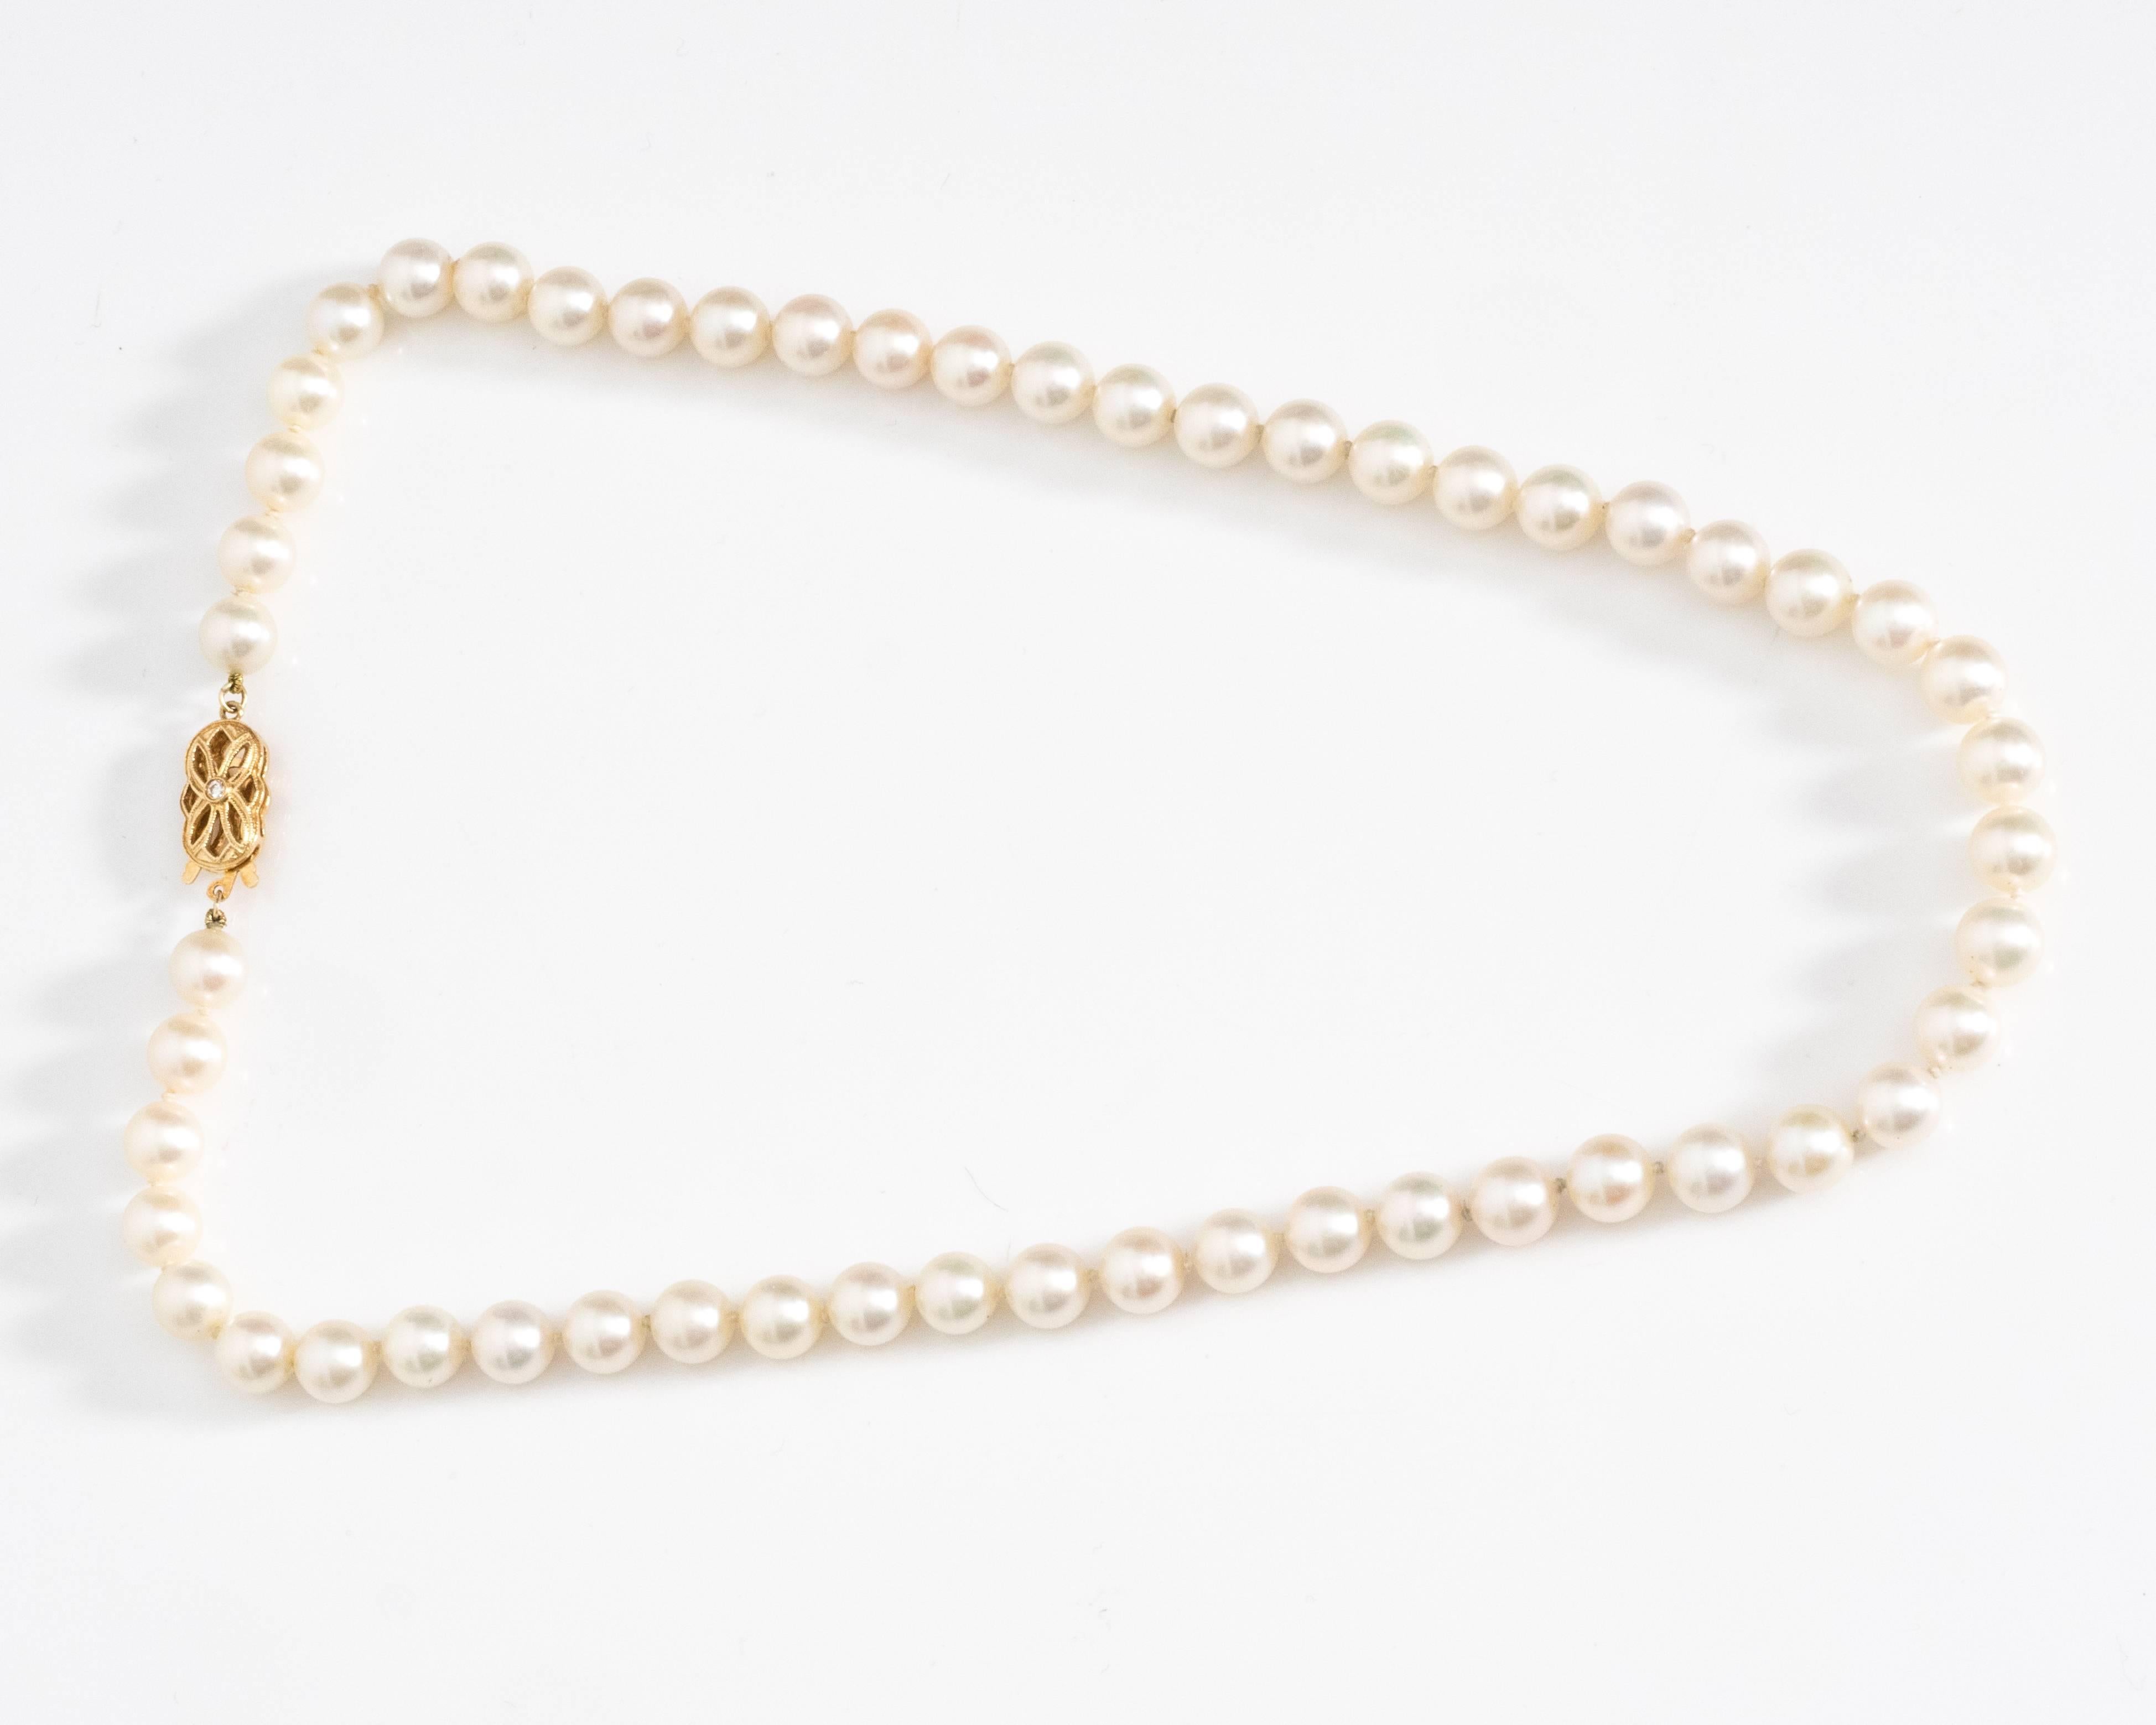 2010 Mikimoto Pearl necklace - 18k Yellow Gold, Cultured Pearls, Diamonds

18 inch long Mikimoto Cultured Pearl
Diamond and 18k Yellow Gold clasp.
The clasp features one .03 carat, bezel set diamond on each side. 
The pearls are creamy white in